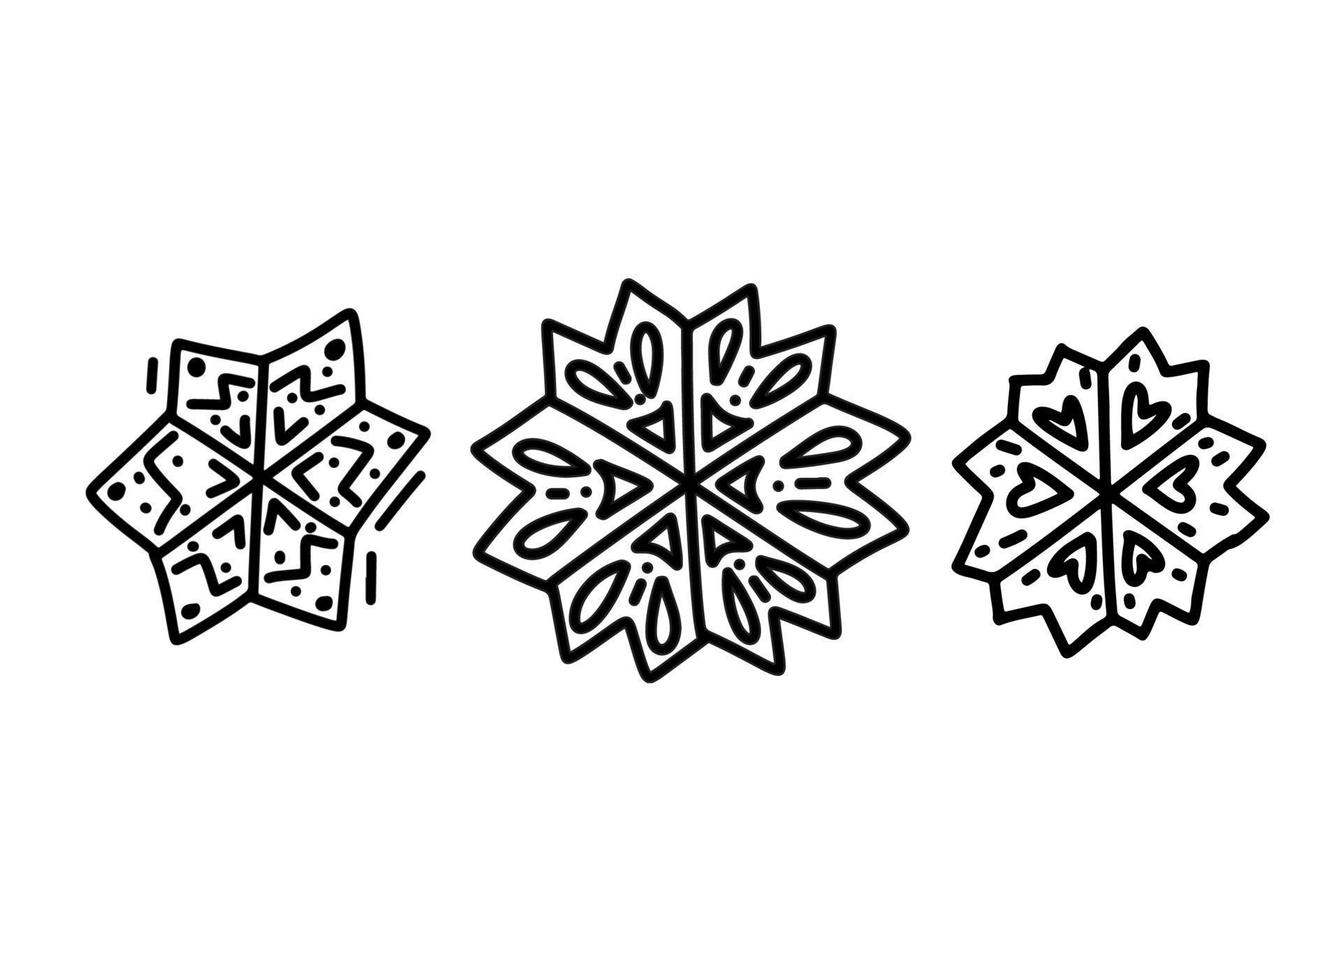 Hand drawn snowflakes icons set on white background for decoration design. Doodle vector illustration. Winter elements for Christmas and New Year